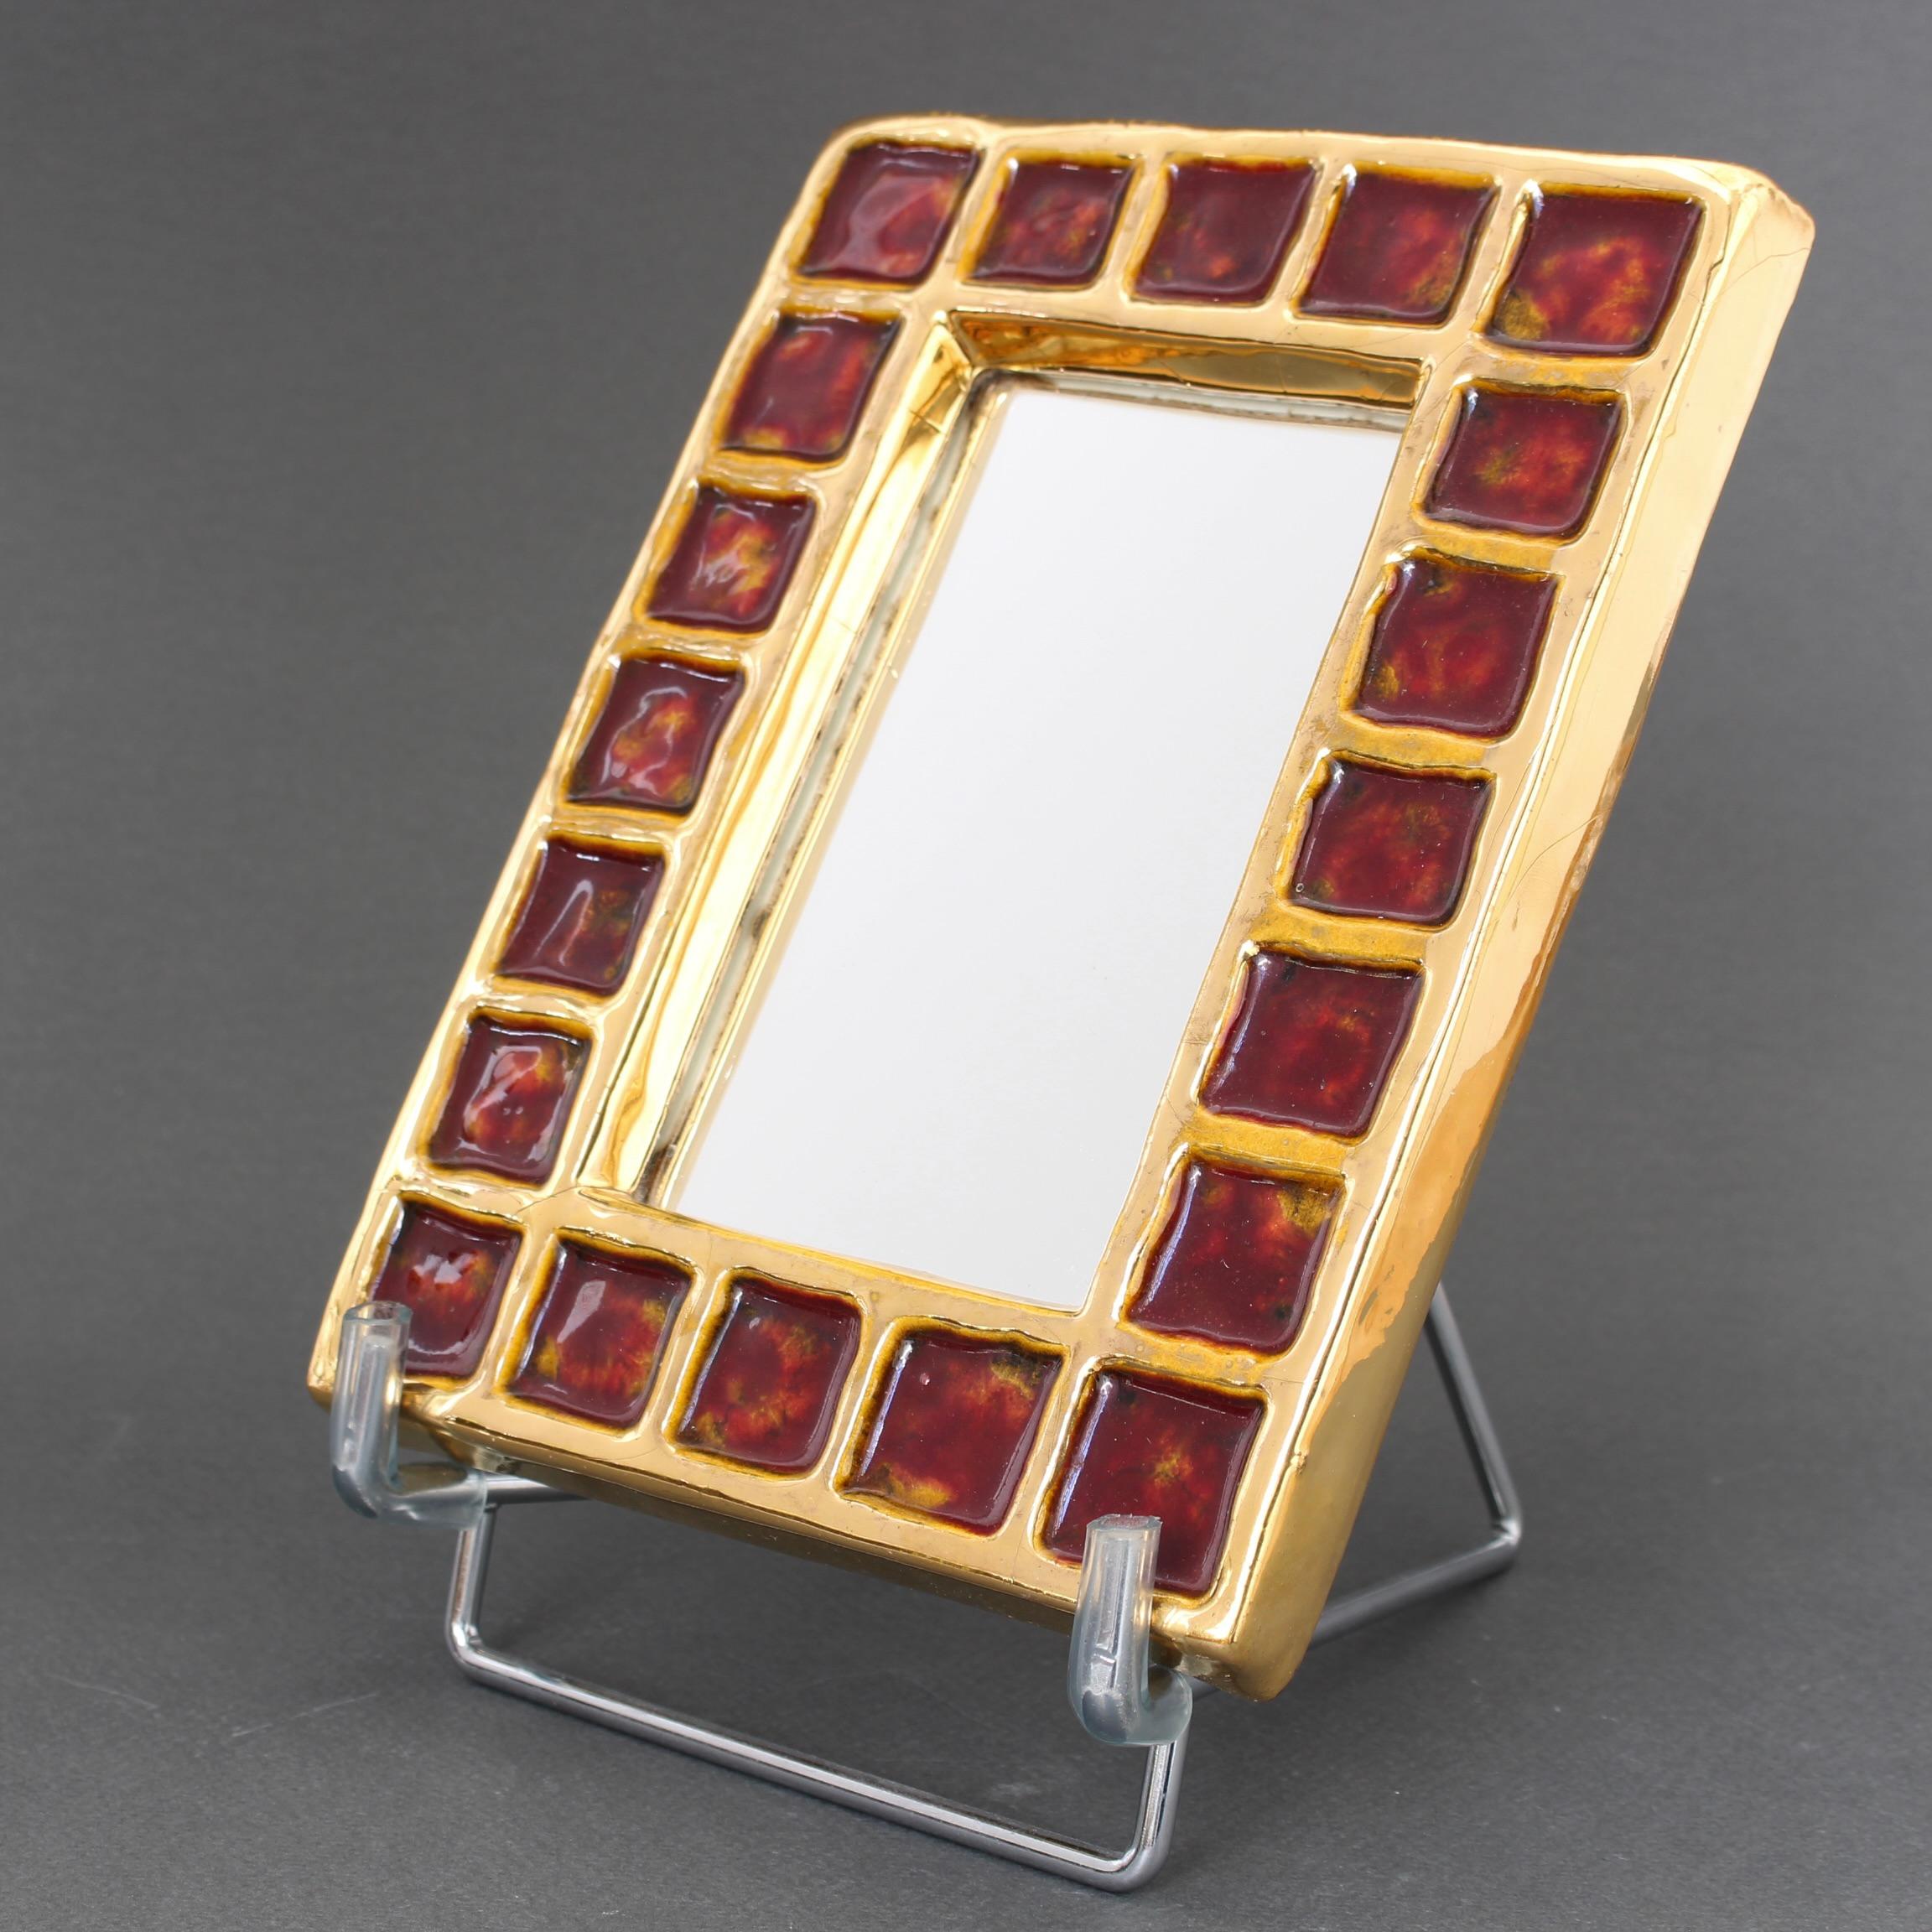 Vintage French Ceramic Mirror by François Lembo (circa 1970s) For Sale 5